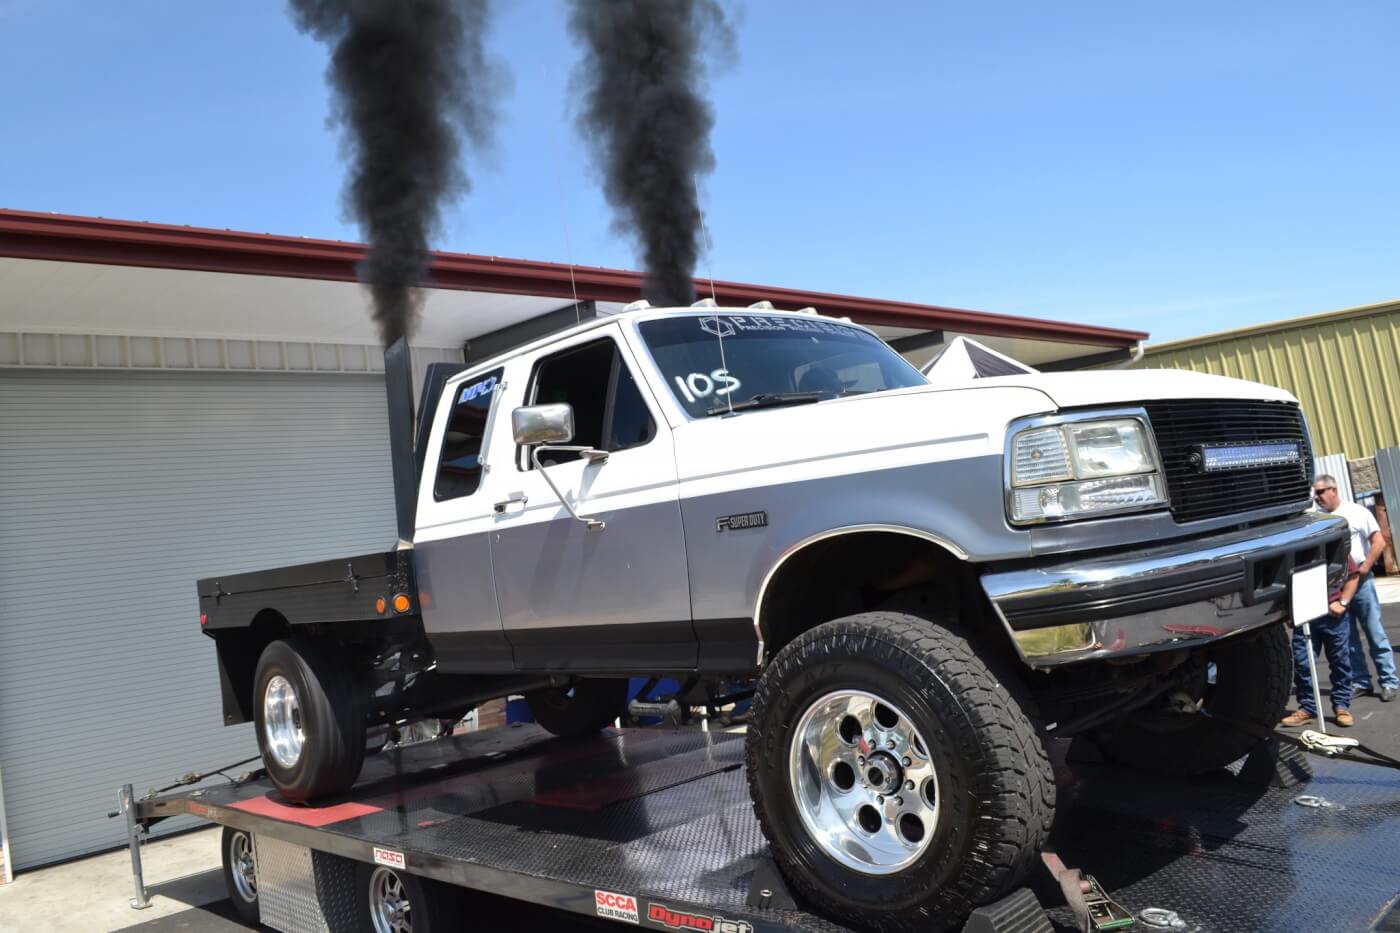 Perhaps the best low-buck rig was this 7.3L which used a stock turbo, 160/100 injectors, and a decade-old "smoke tune" to put down 396 rwhp.